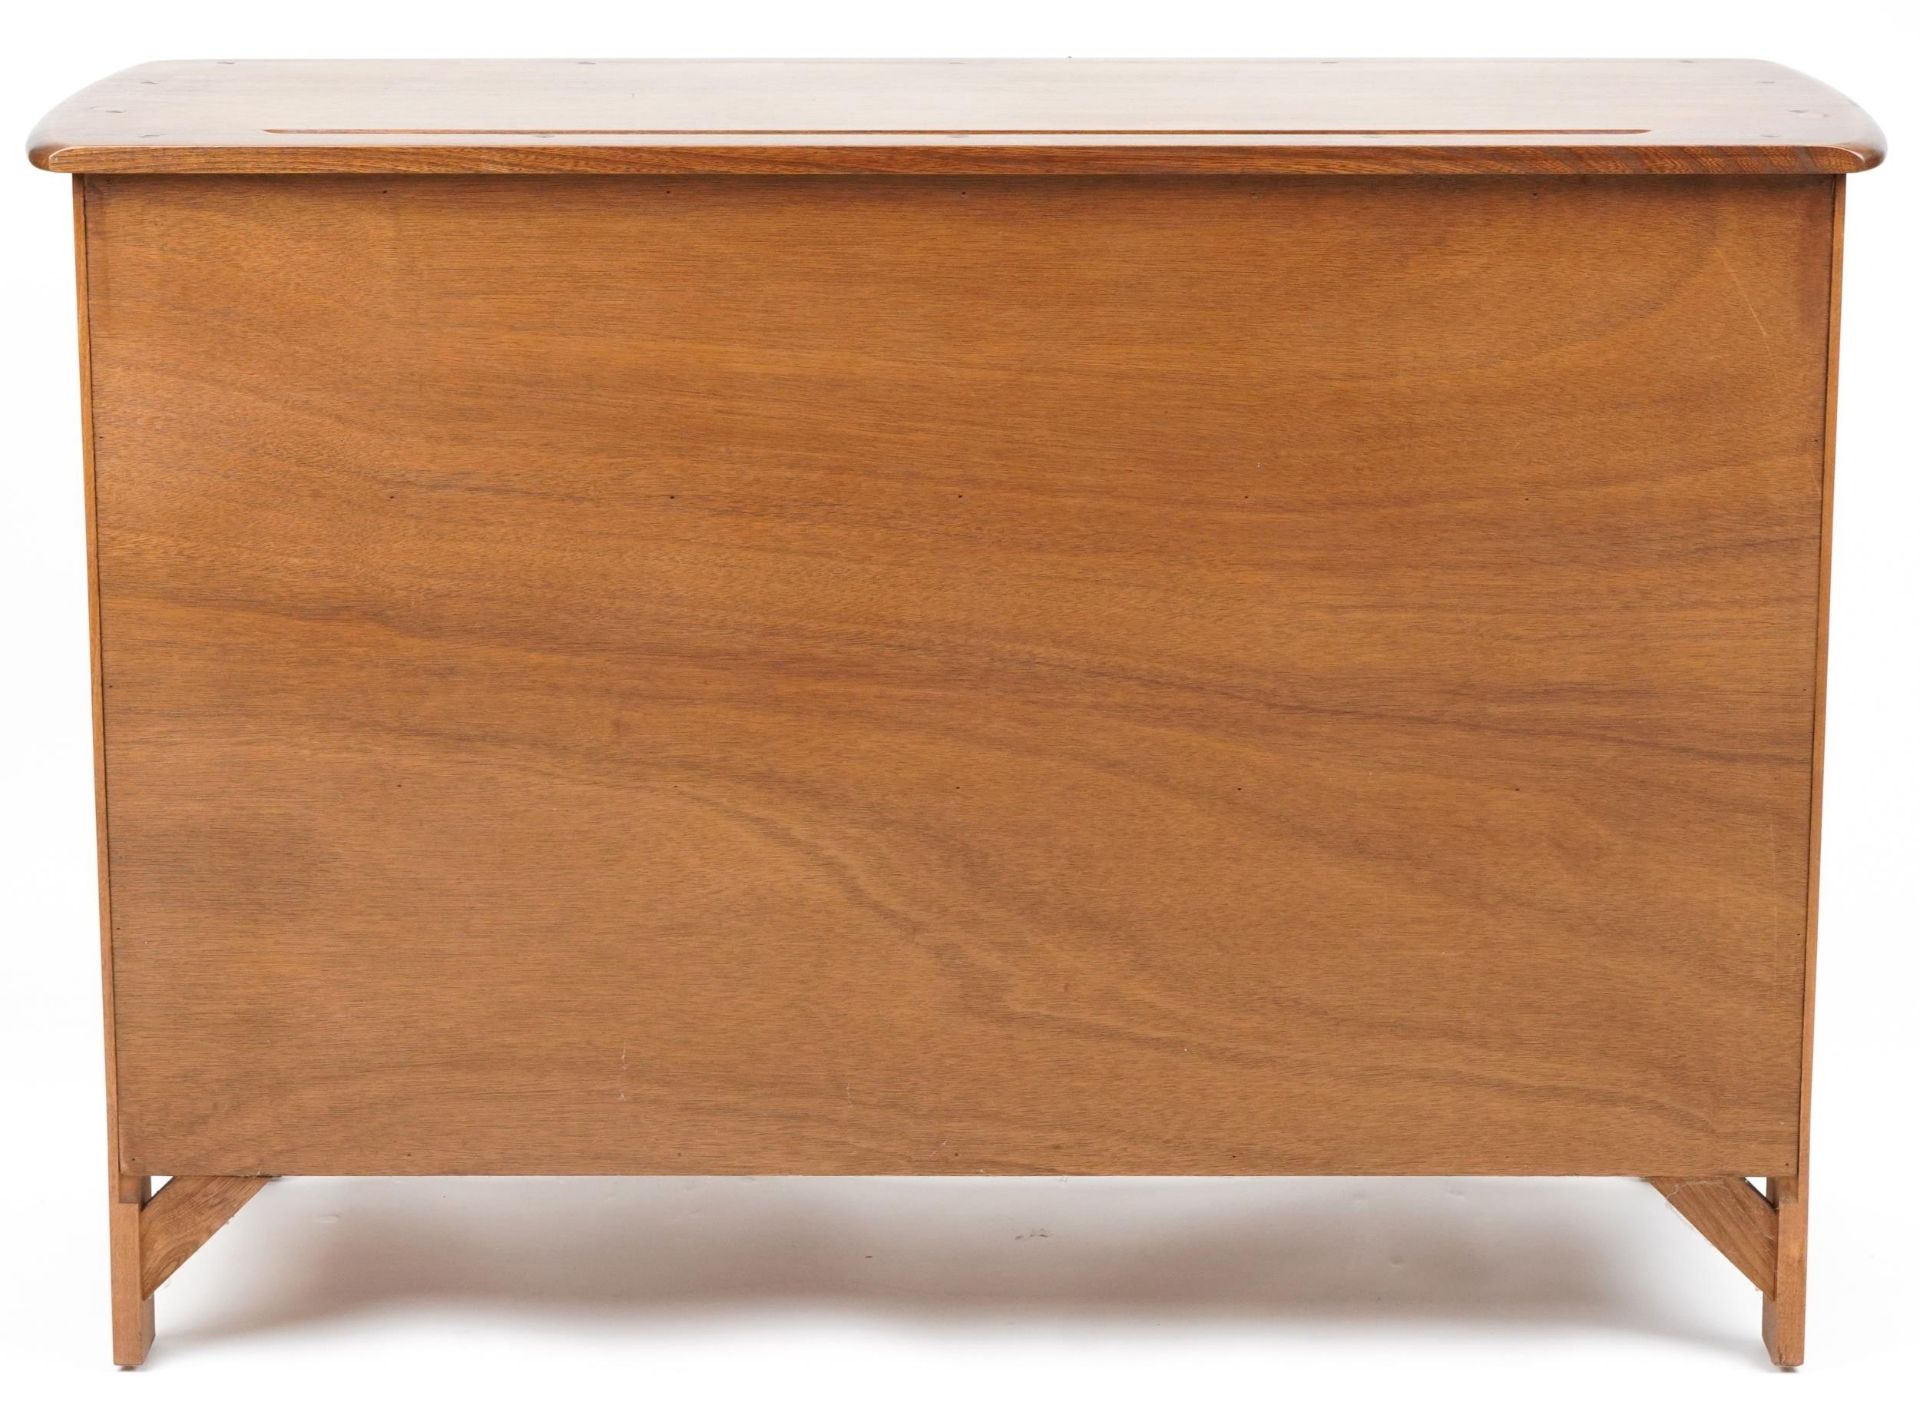 Ercol elm sideboard fitted with two drawers above a pair of cupboard doors, 85cm H x 122cm W x - Image 6 of 6